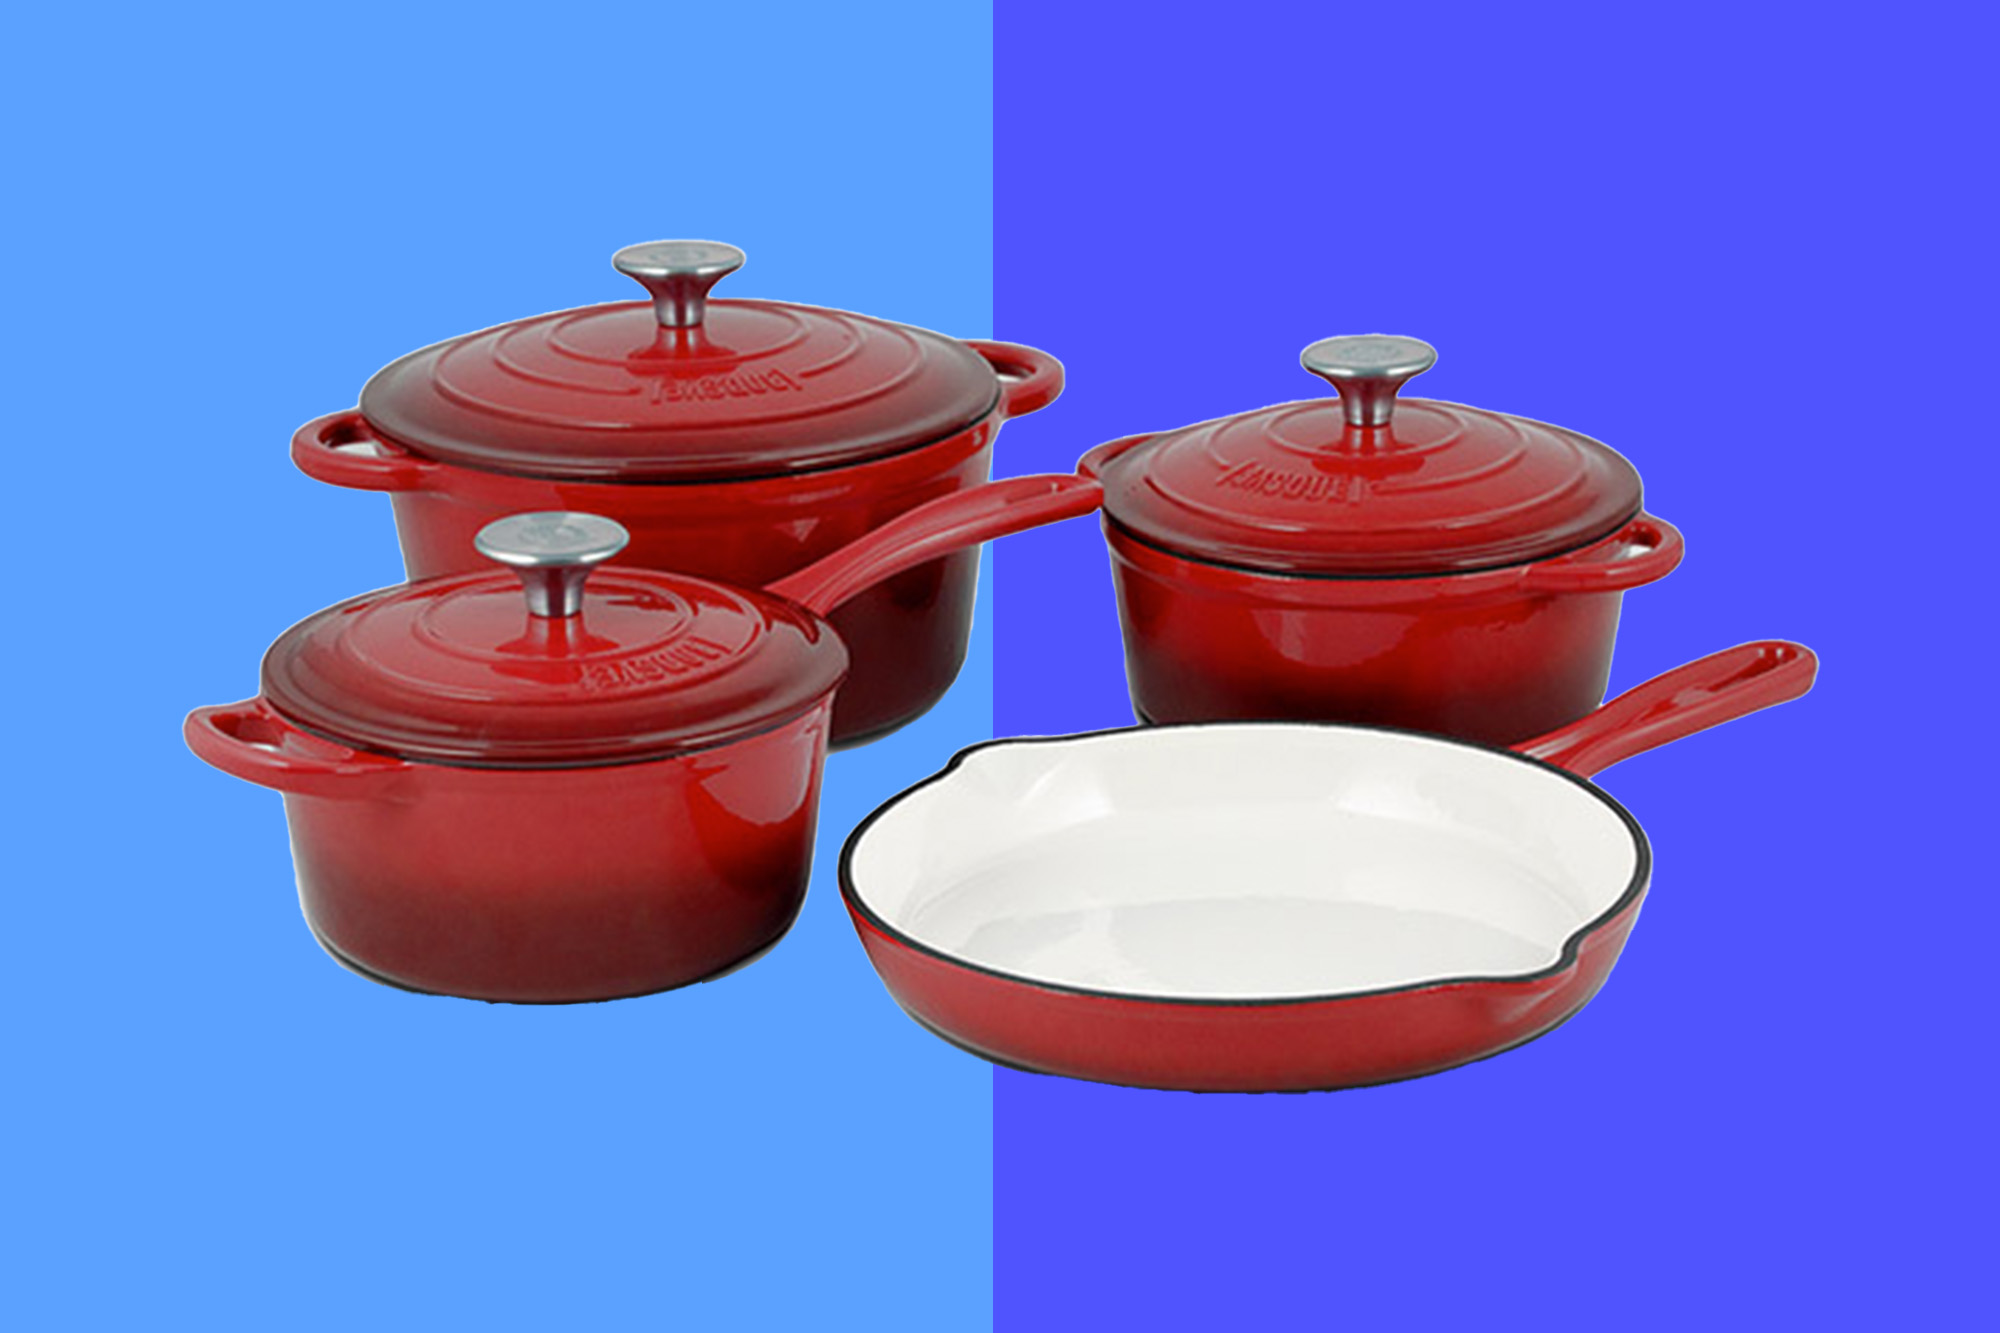 Red pots and pans on a shelf